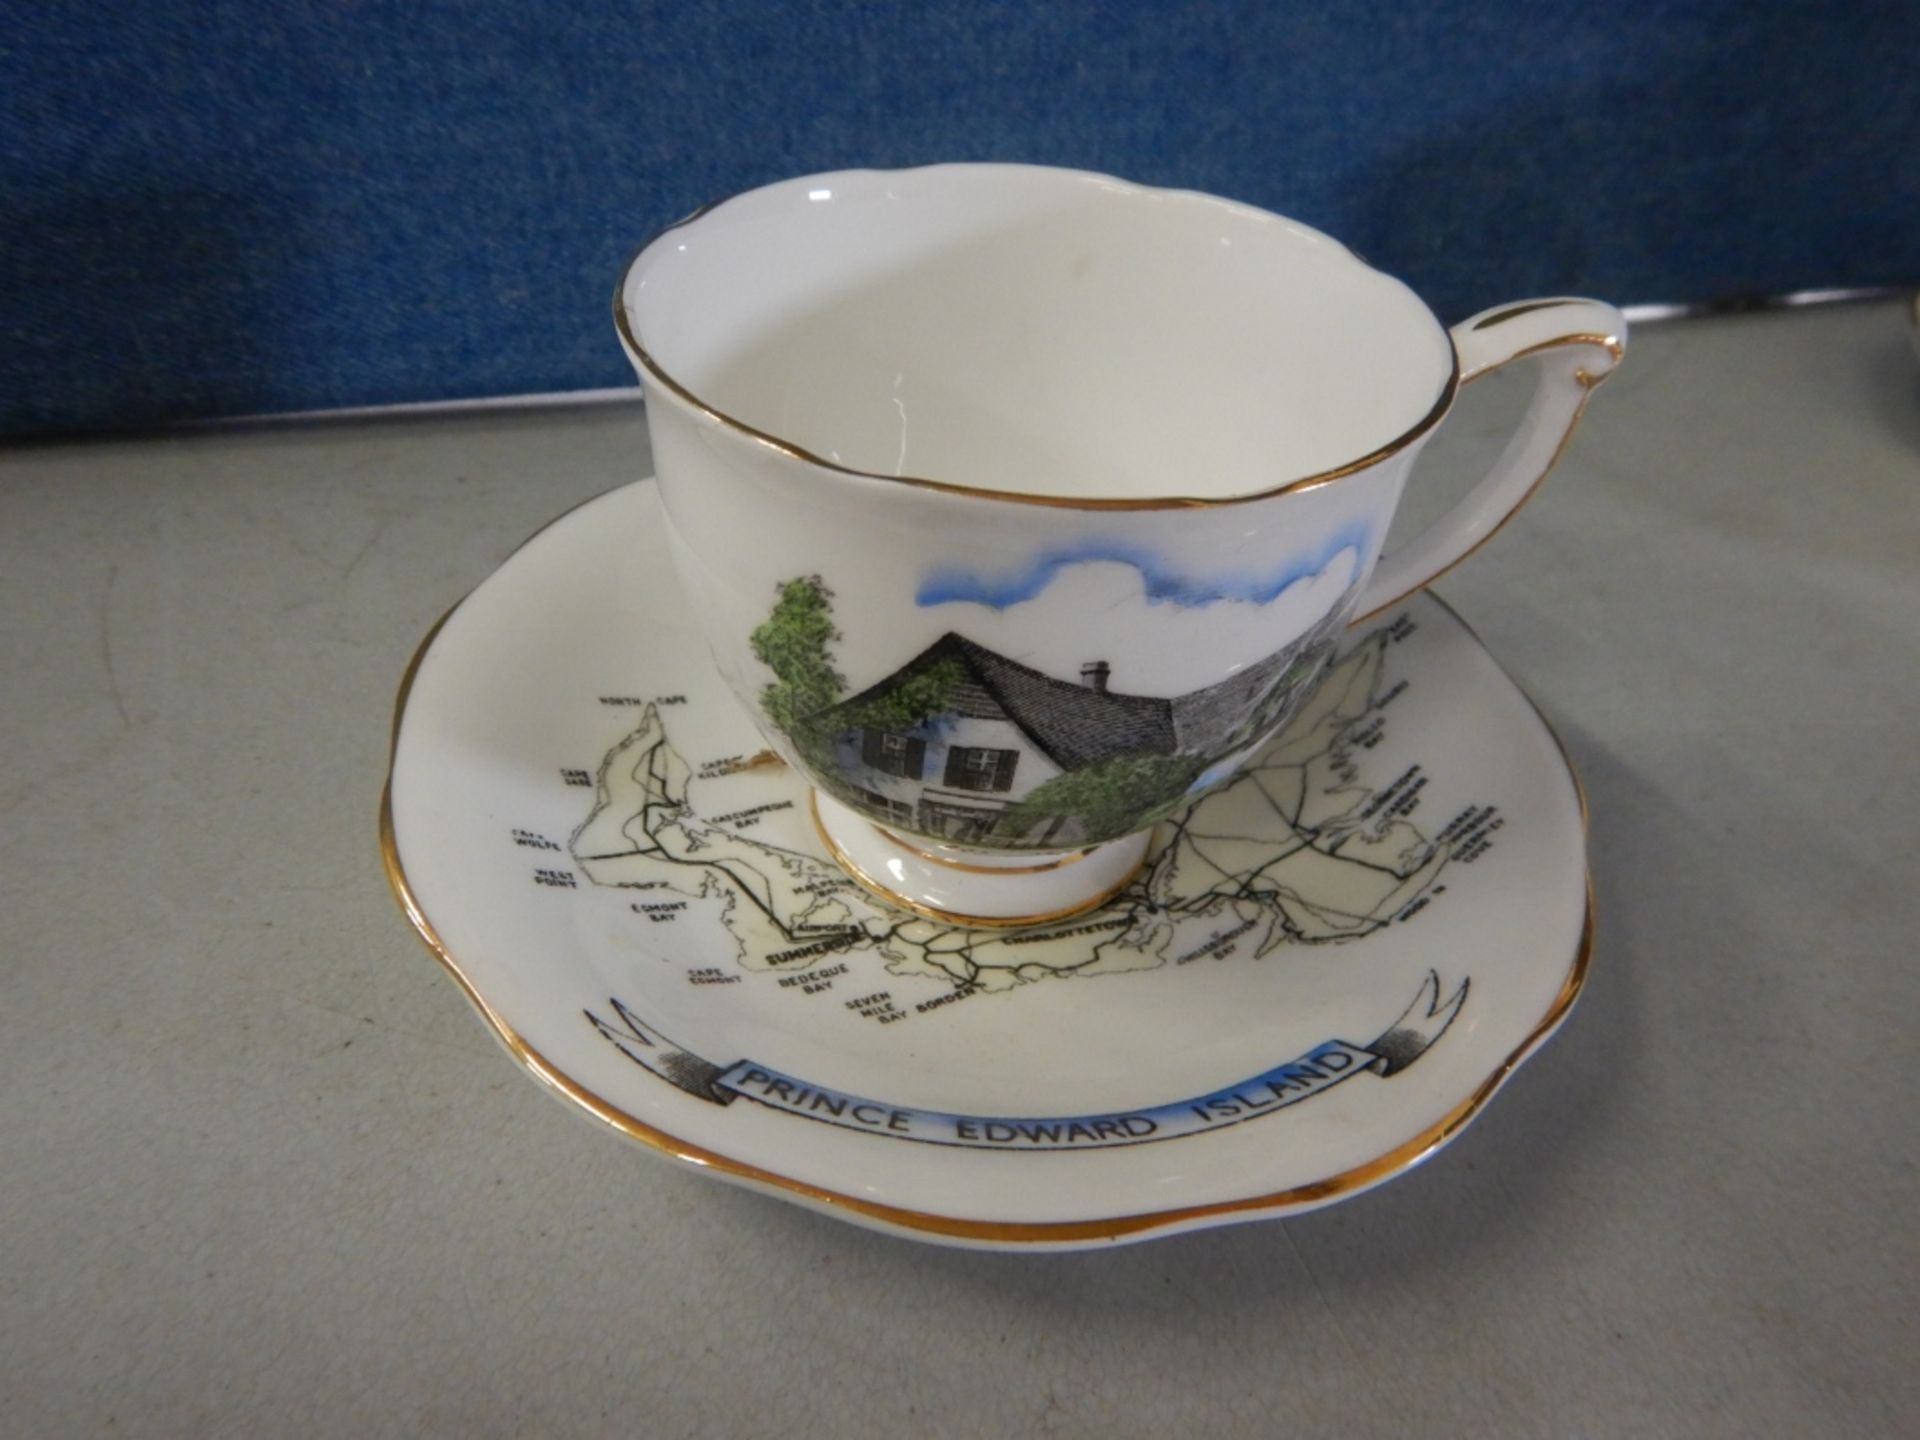 ANTIQUE TEACUPS & SAUCERS - MADE IN ENGLAND - LOT OF 3 - FINE BONE CHINA "PRINCE EDWARD ISLAND" - - Image 7 of 15